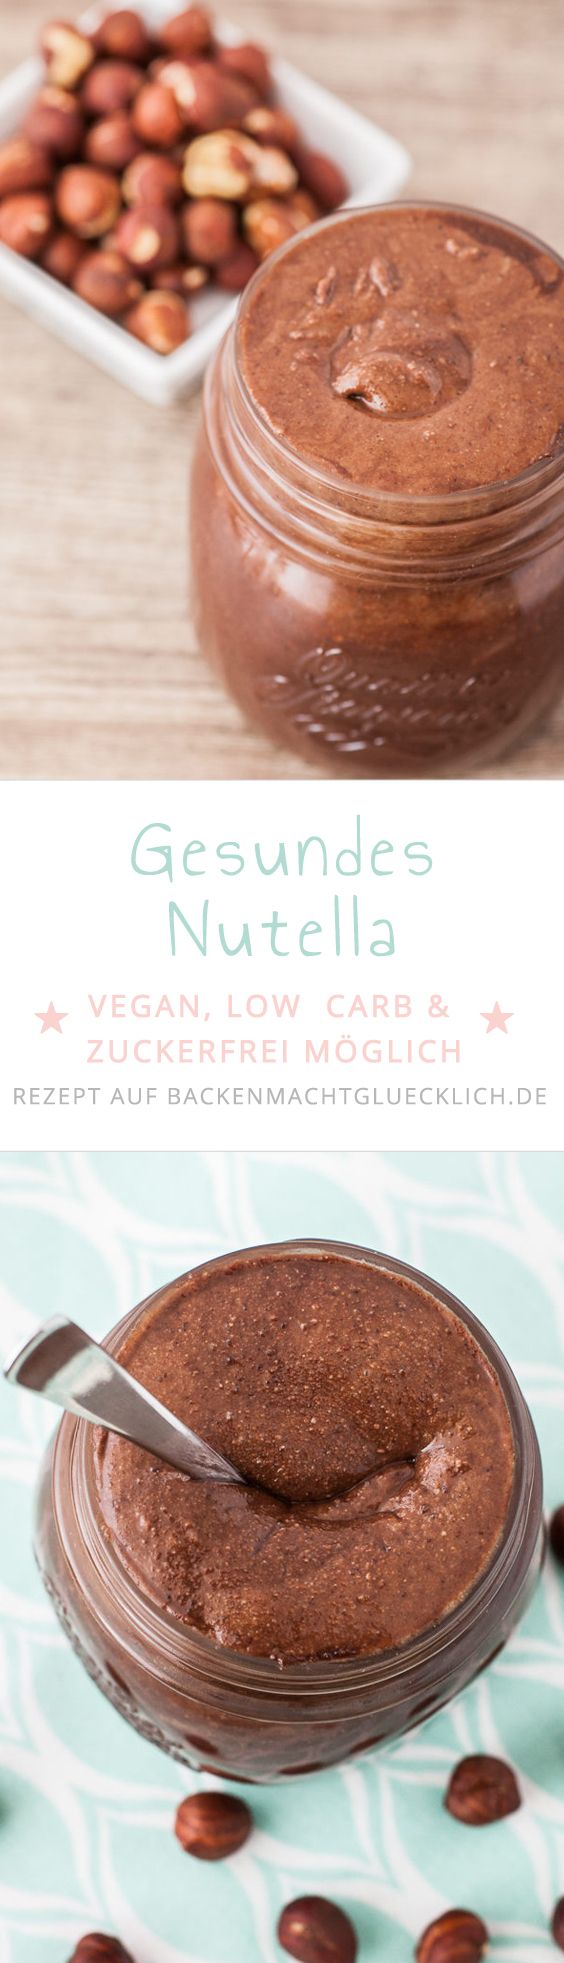 Selbstgemachtes Nutella